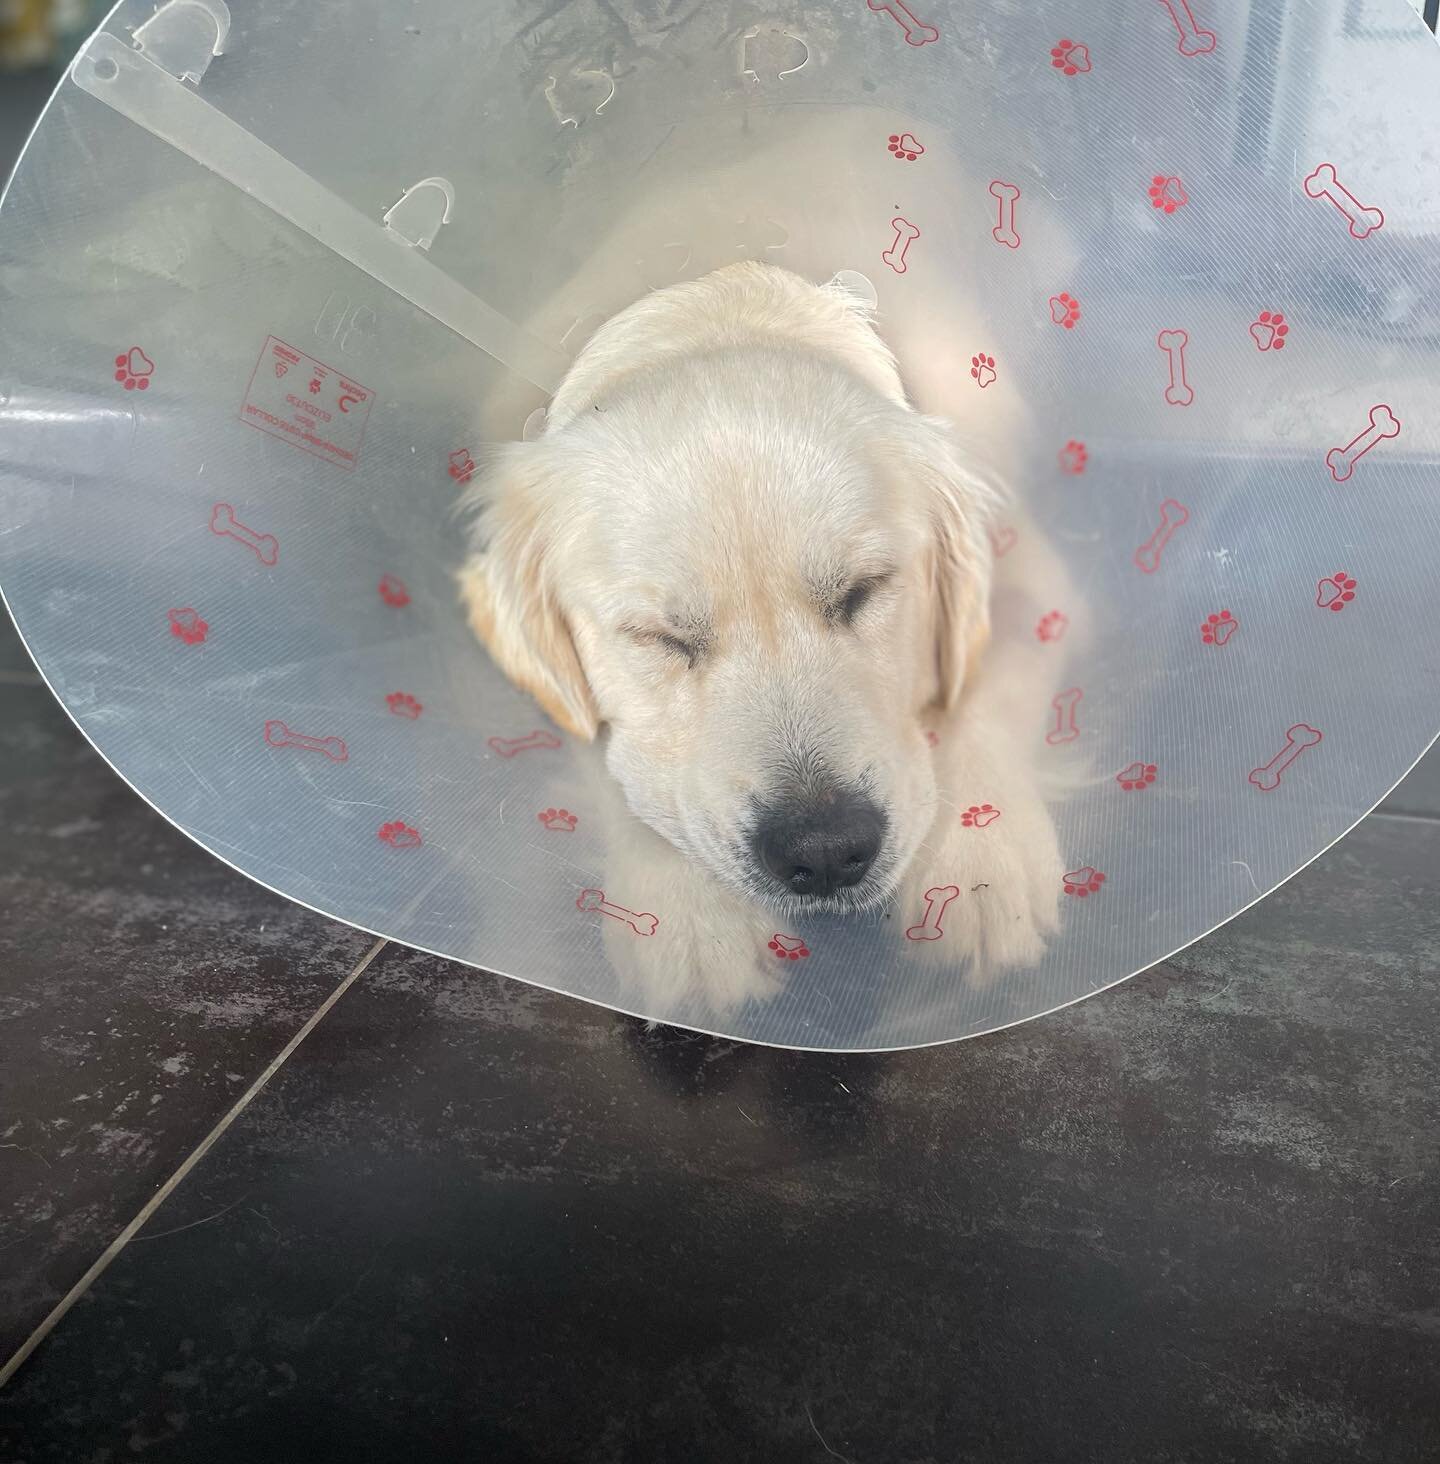 Mr Bear out here living his best life in his cone (kidding he&rsquo;s not a fan at all and after 4 days still does not know how to get around the house with it 😆) 

Bear has officially retired from Daddy duties! Looking after little puppies 16 weeks